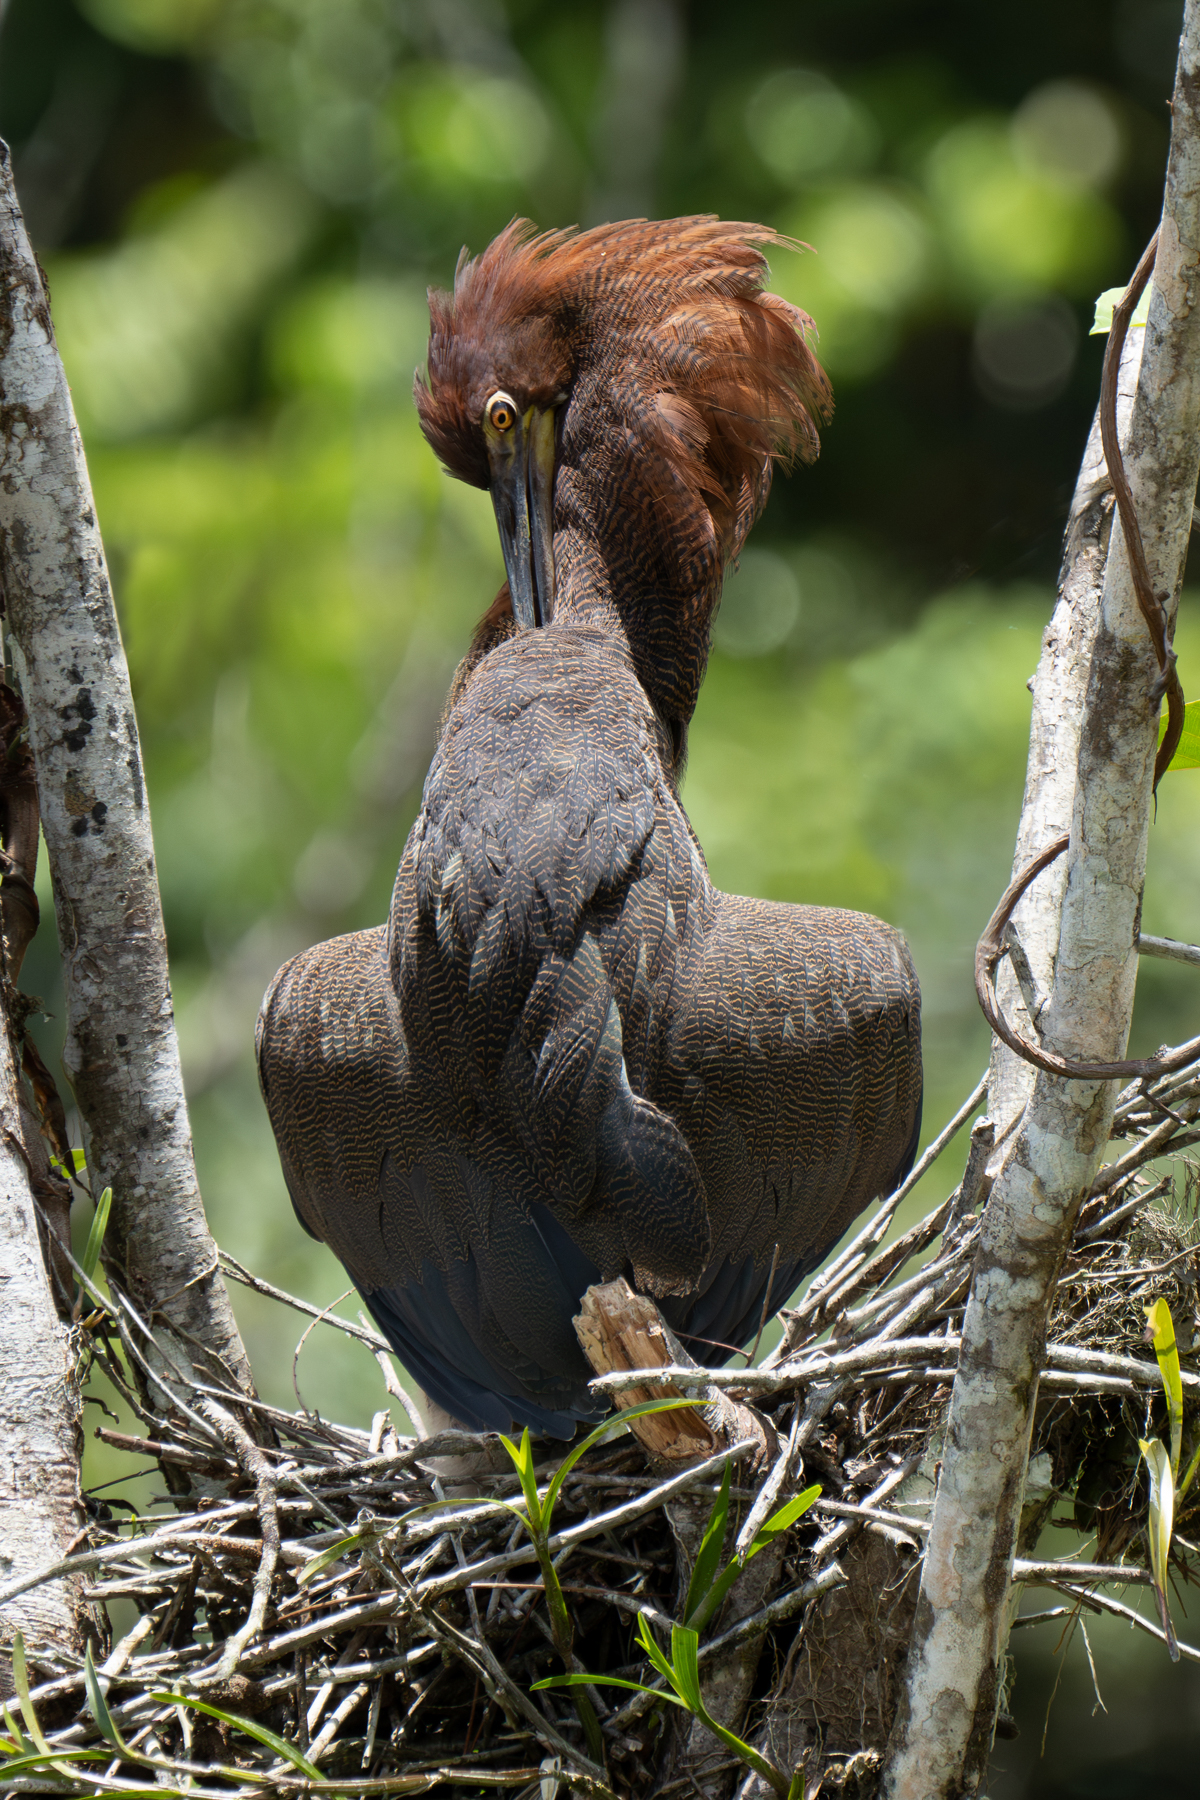 A Rufescent Tiger Heron mother preening herself on her nest (image by Inger Vandyke)